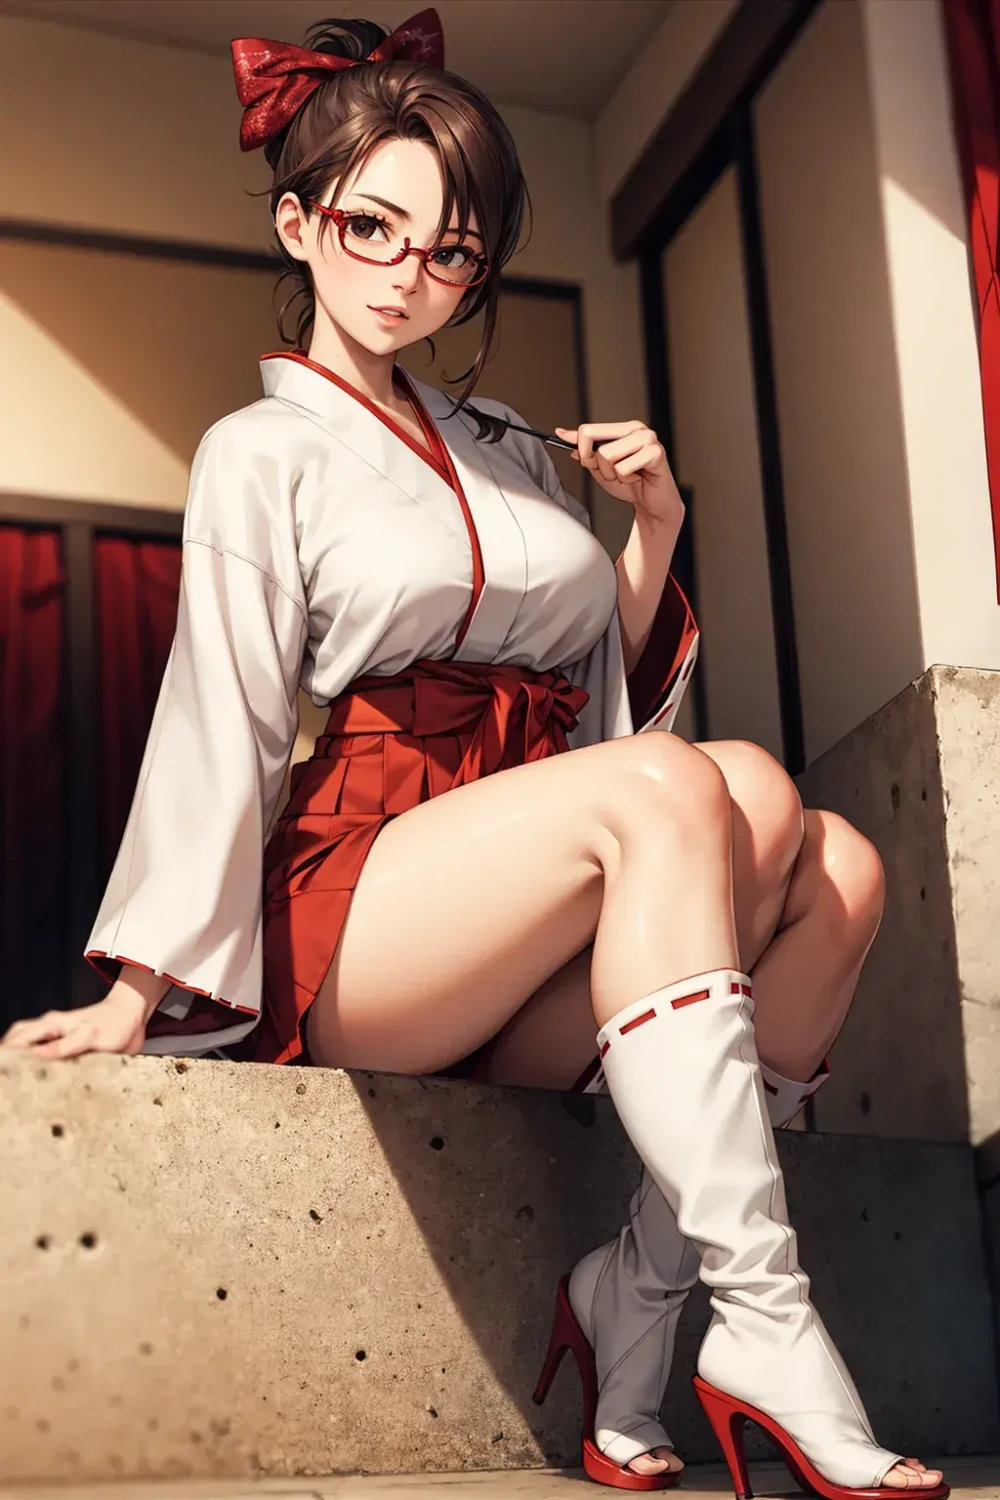 miko-anime-style-all-ages-31